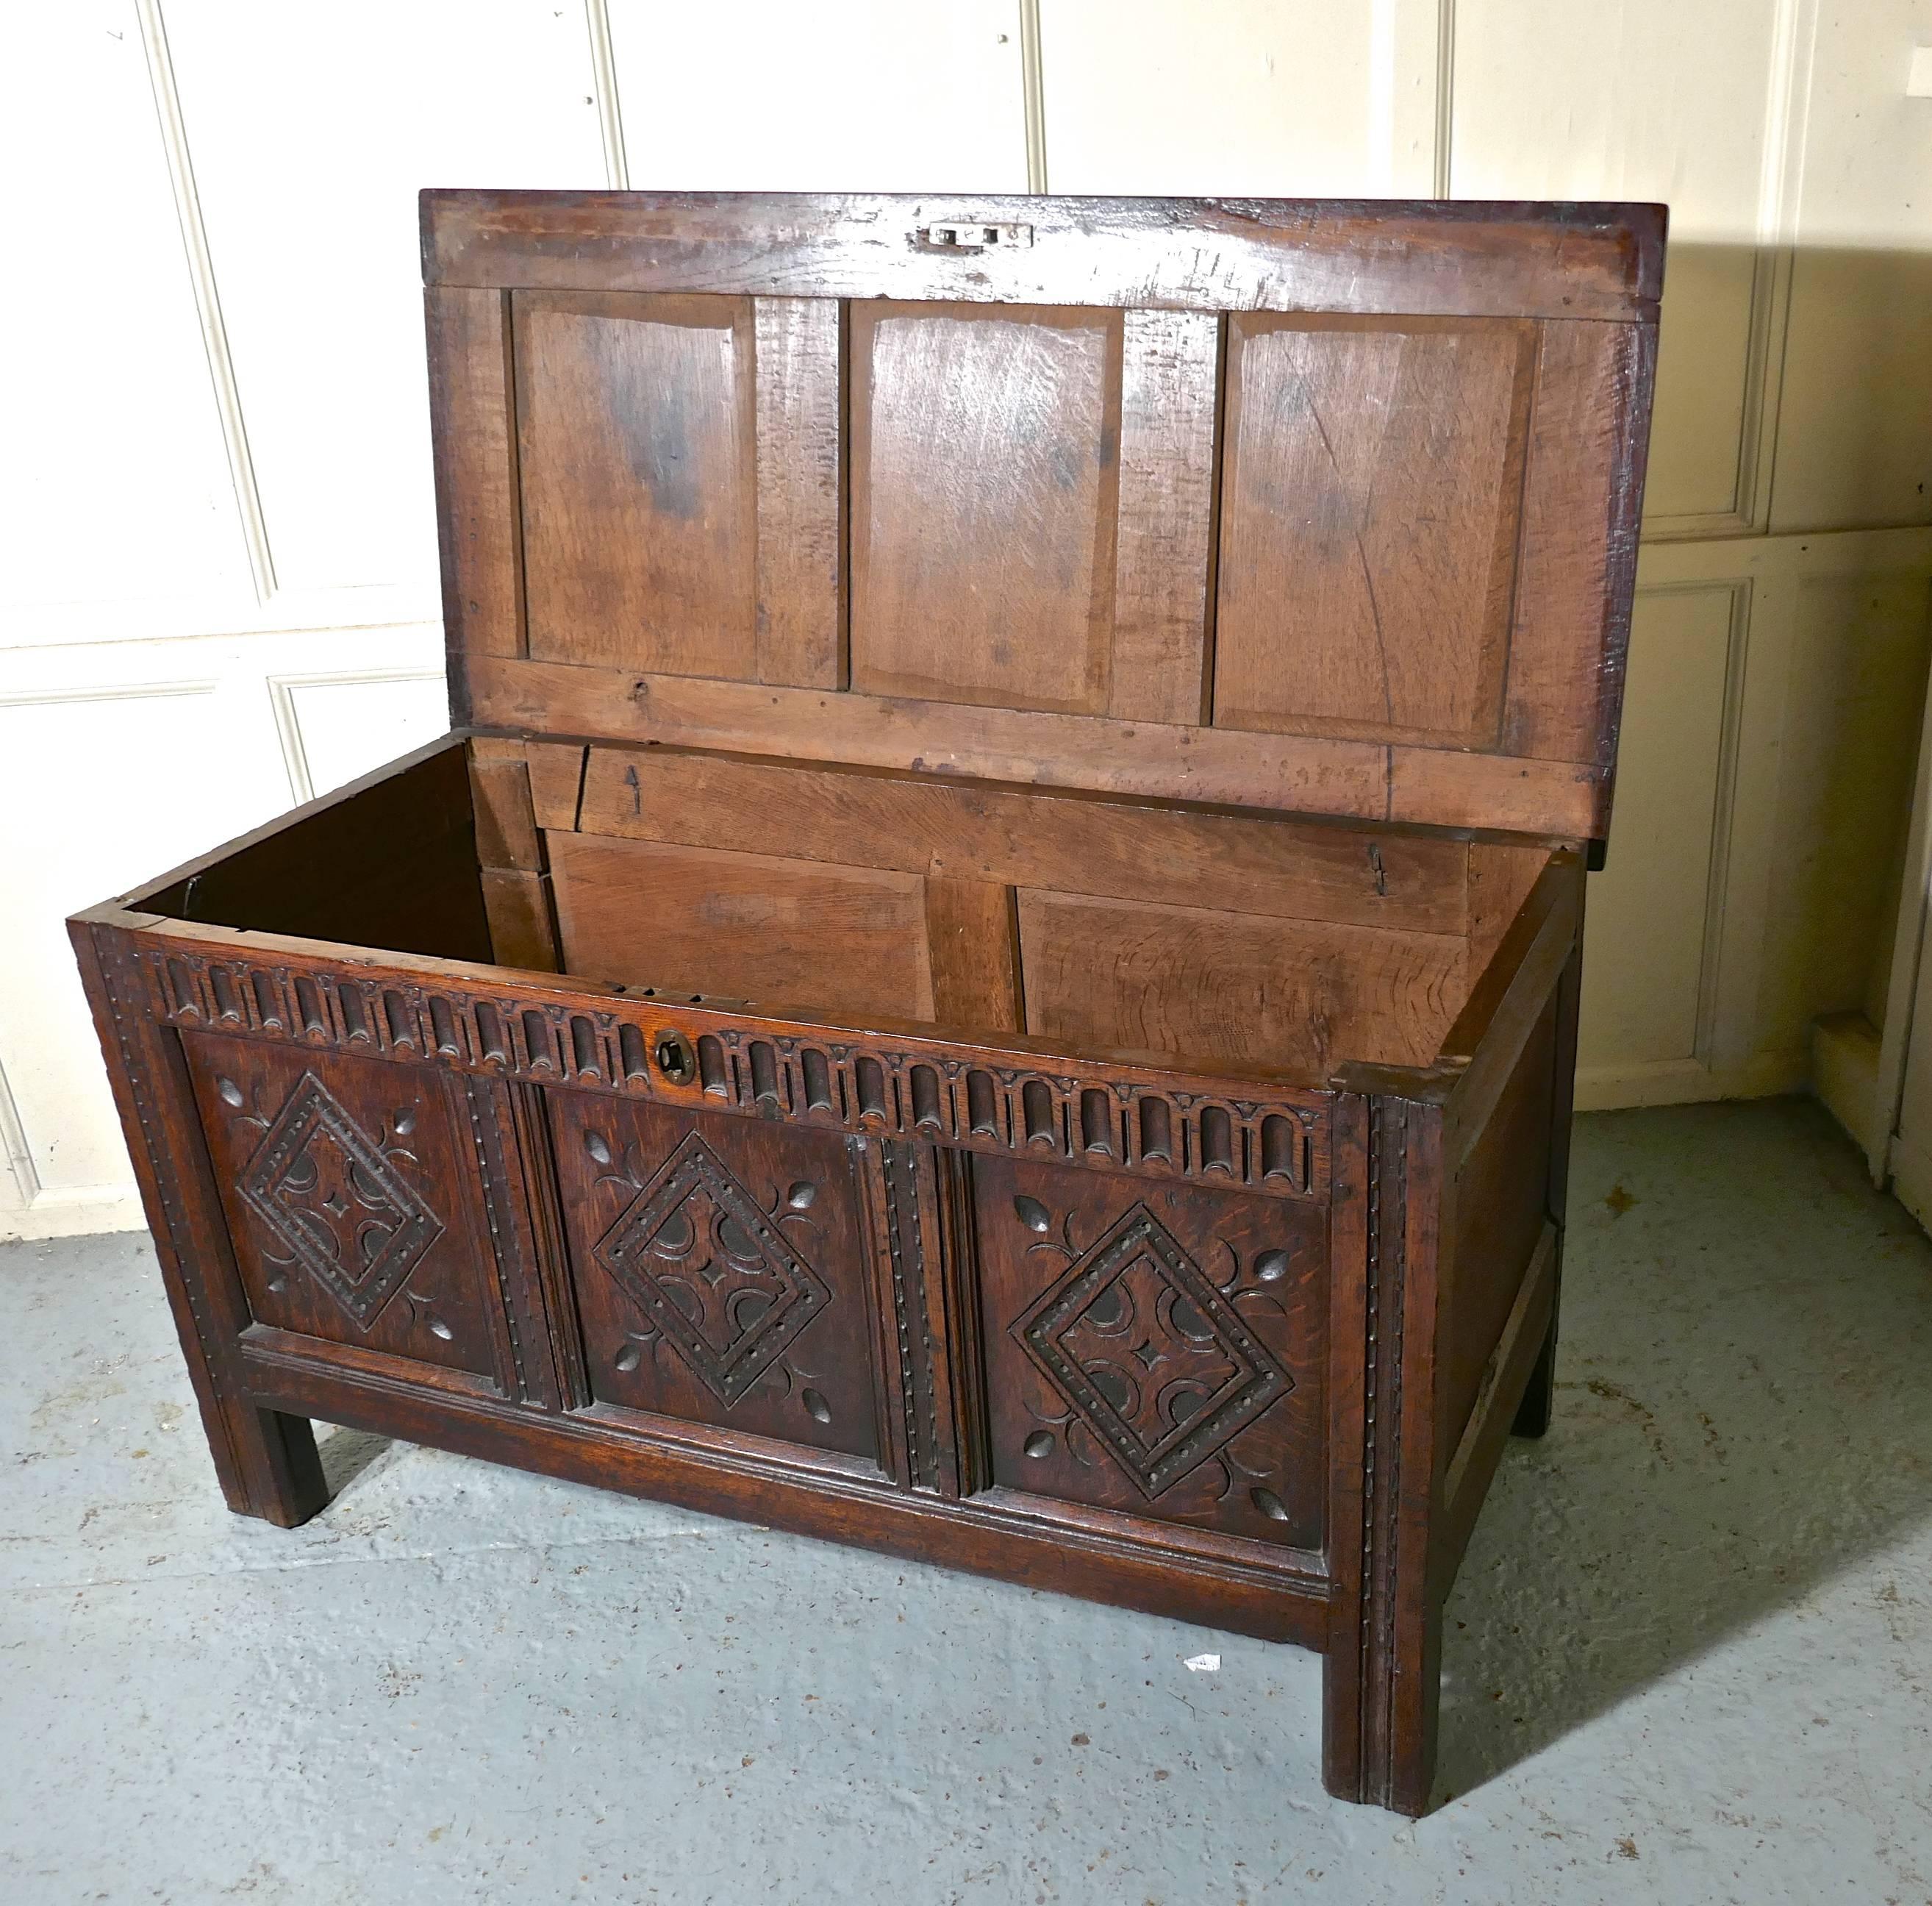 17th century carved oak coffer, with key

This is a lovely old piece, with a superb patina, the chest has three geometrically carved panels on the front set into carved borders and on the heavy top of the coffer there are 3 deep moulded panels